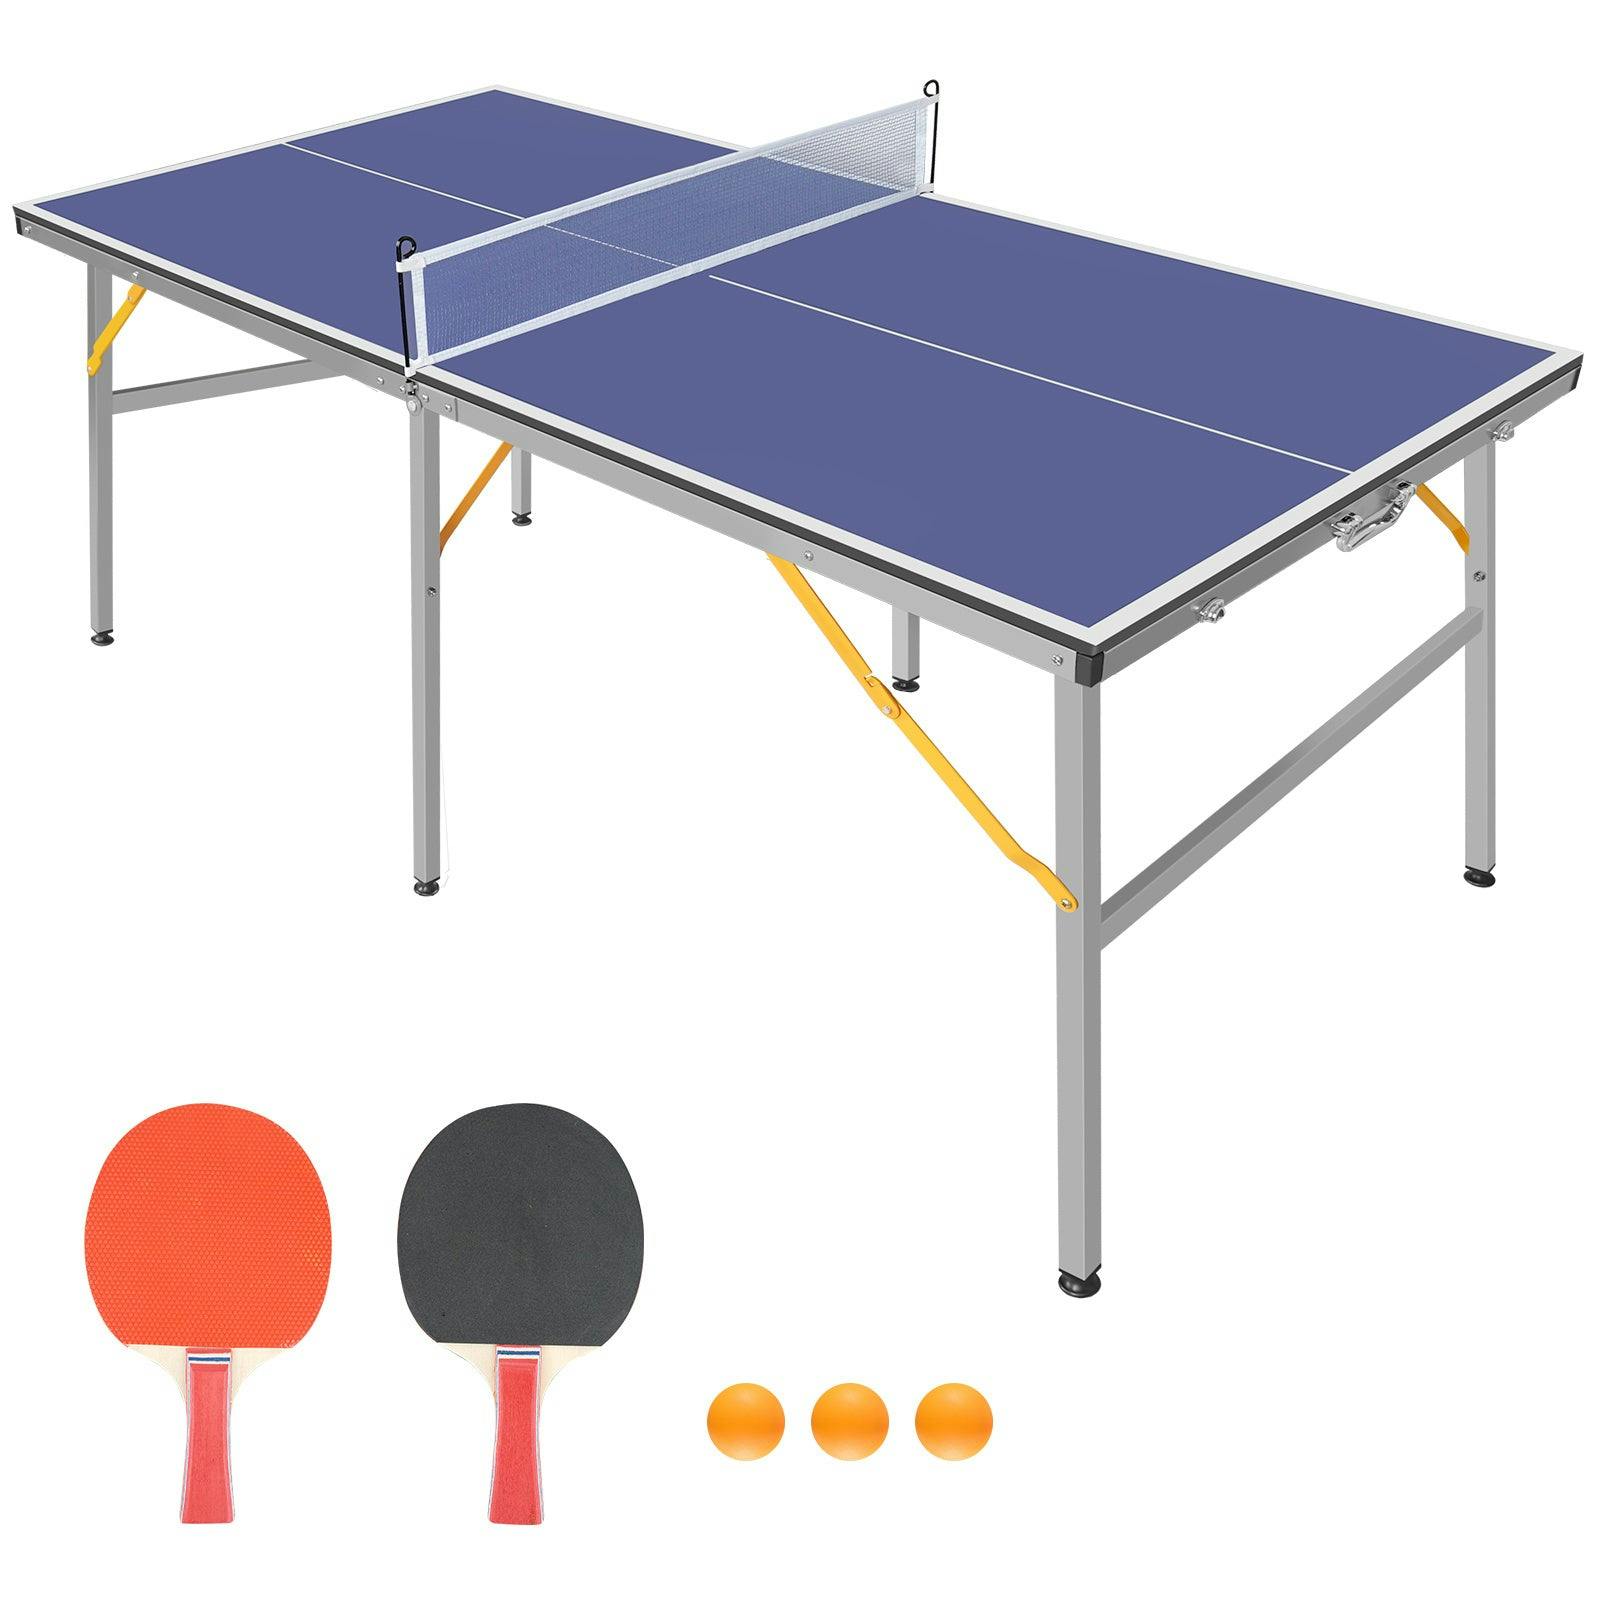 6ft Mid-Size Table Tennis Table Foldable & Portable Ping Pong Table Set for Indoor & Outdoor Games with Net, 2 Table Tennis Paddles and 3 Balls - dspic_389c6895-eb31-47f6-b192-8a5574447066